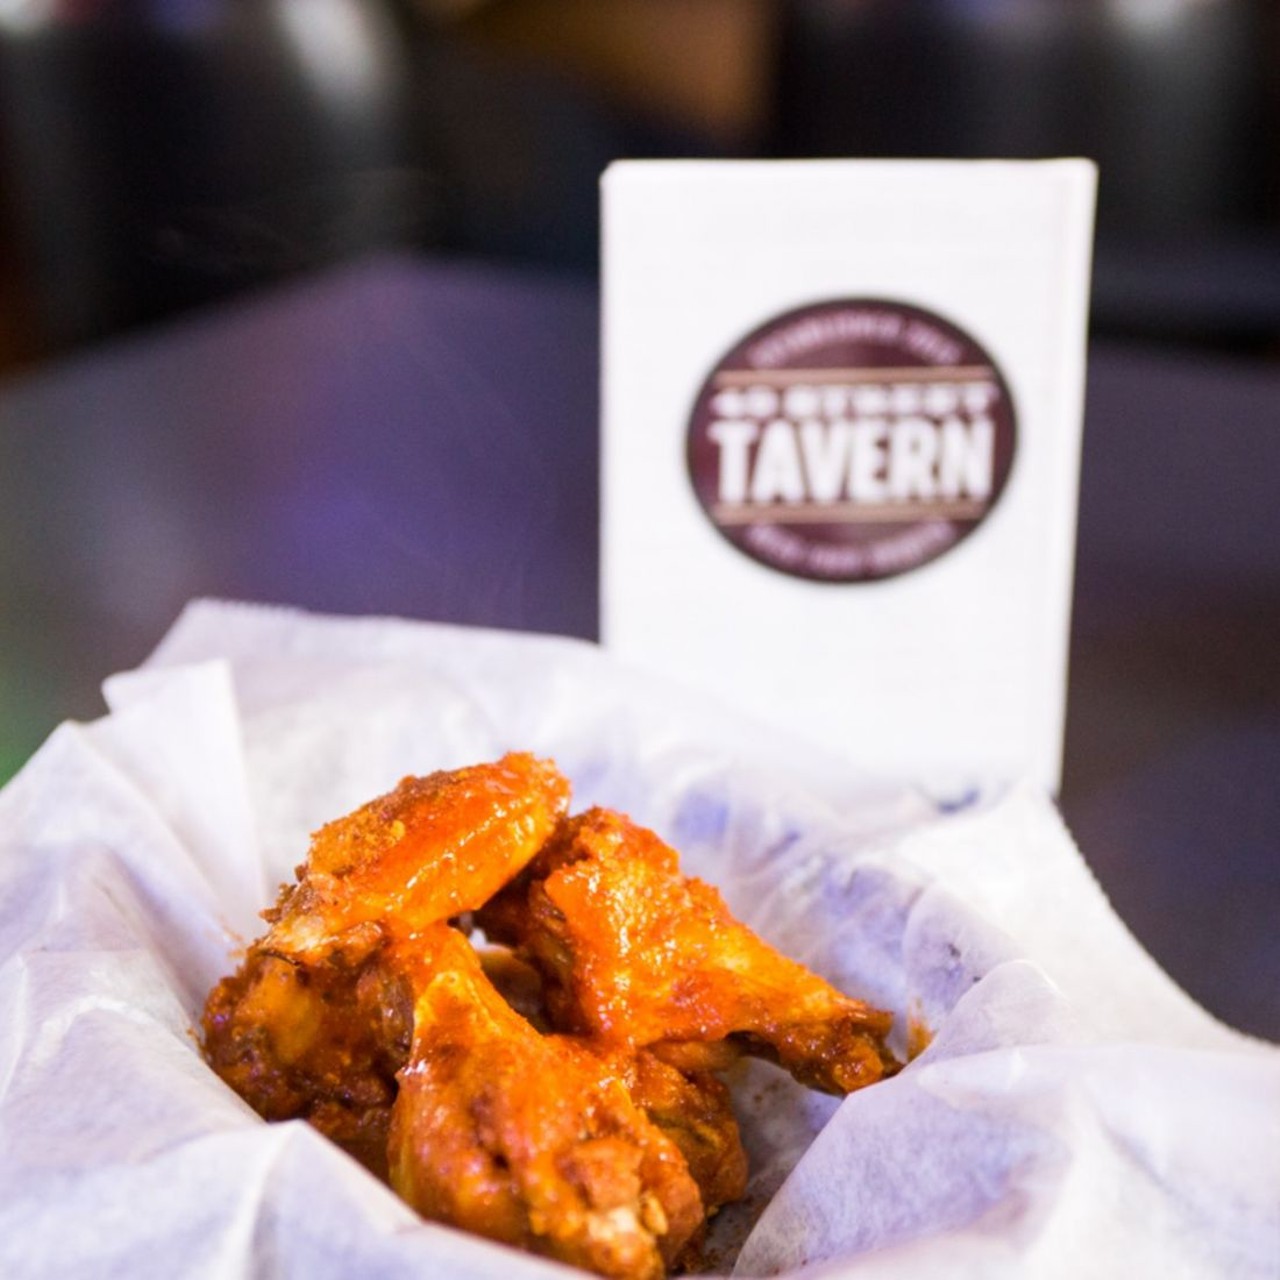  49th Street Tavern 
4129 East 49th St., Cuyahoga Falls 
The 49th Street Tavern is offering six wings with any of their flavors: hot, mild, garlic parmesan, mango habanero, sweet chili, teriyaki, extremely hot or BBQ.
Photo Provided by Restaurant